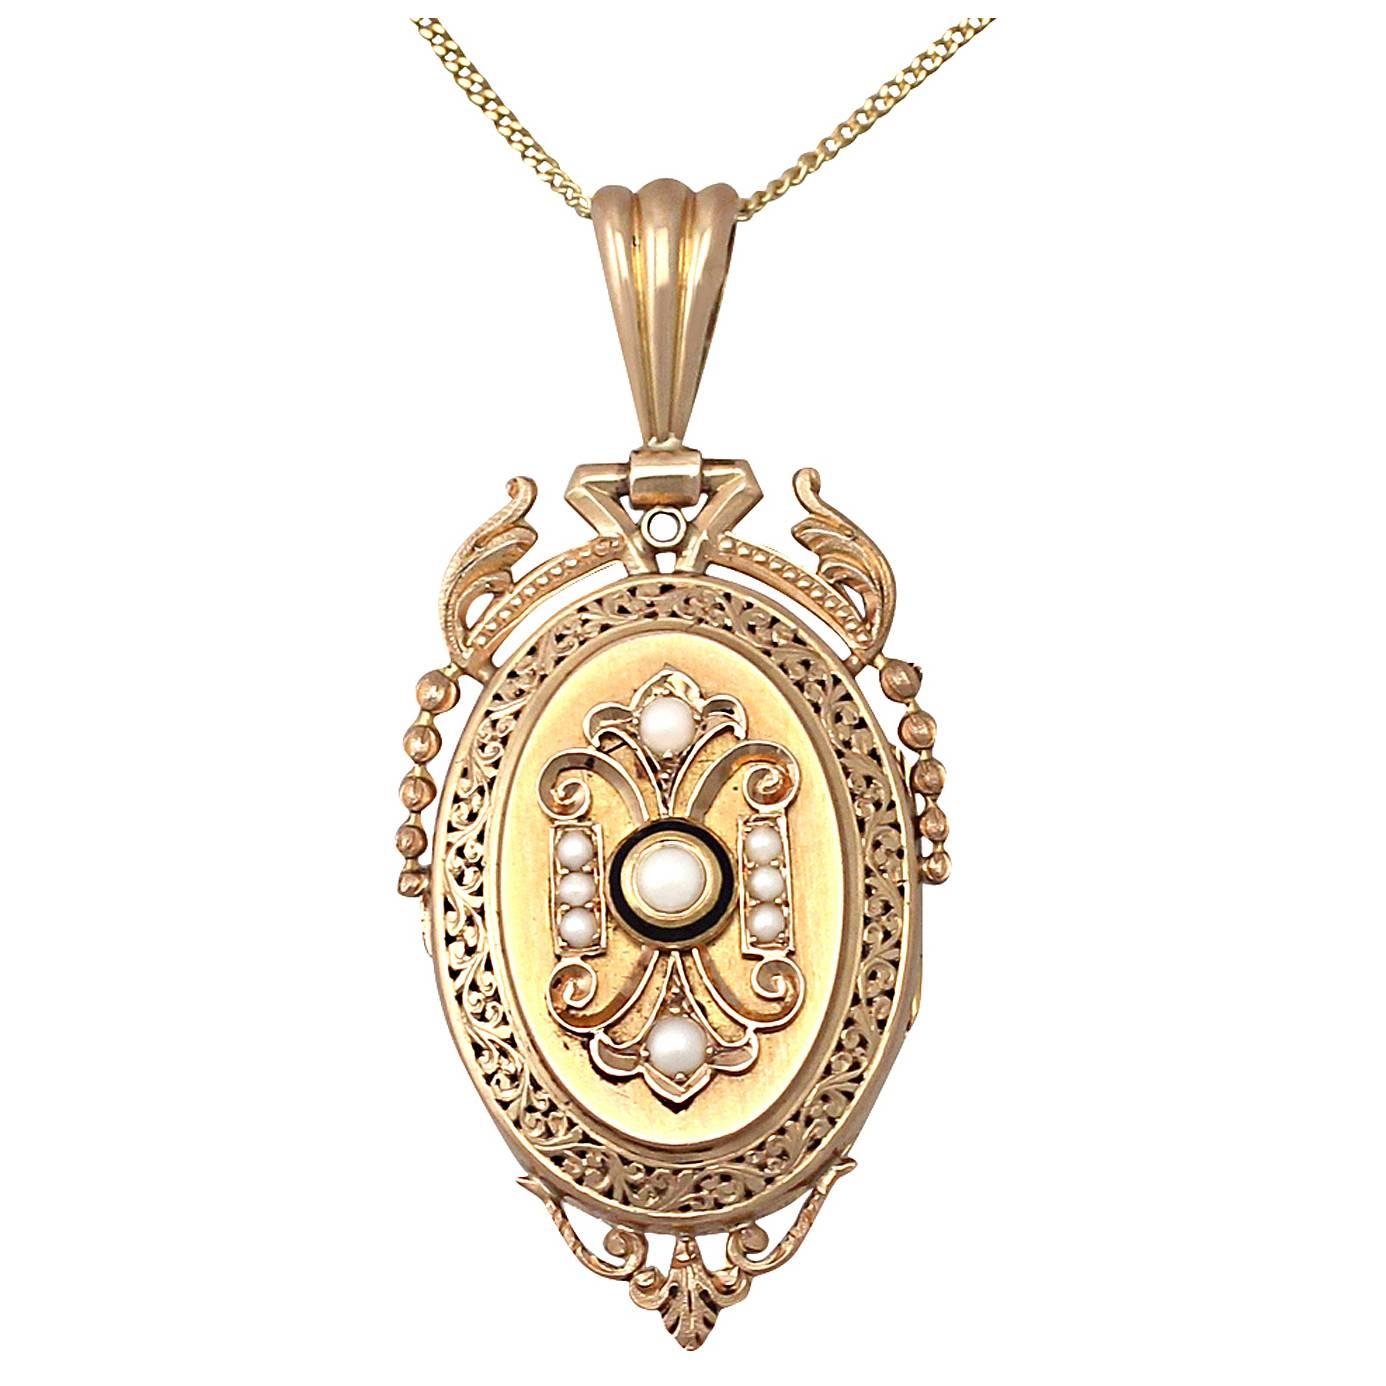 Pearl and Enamel, 18k Yellow Gold Locket/Pendant - Antique French Circa 1880